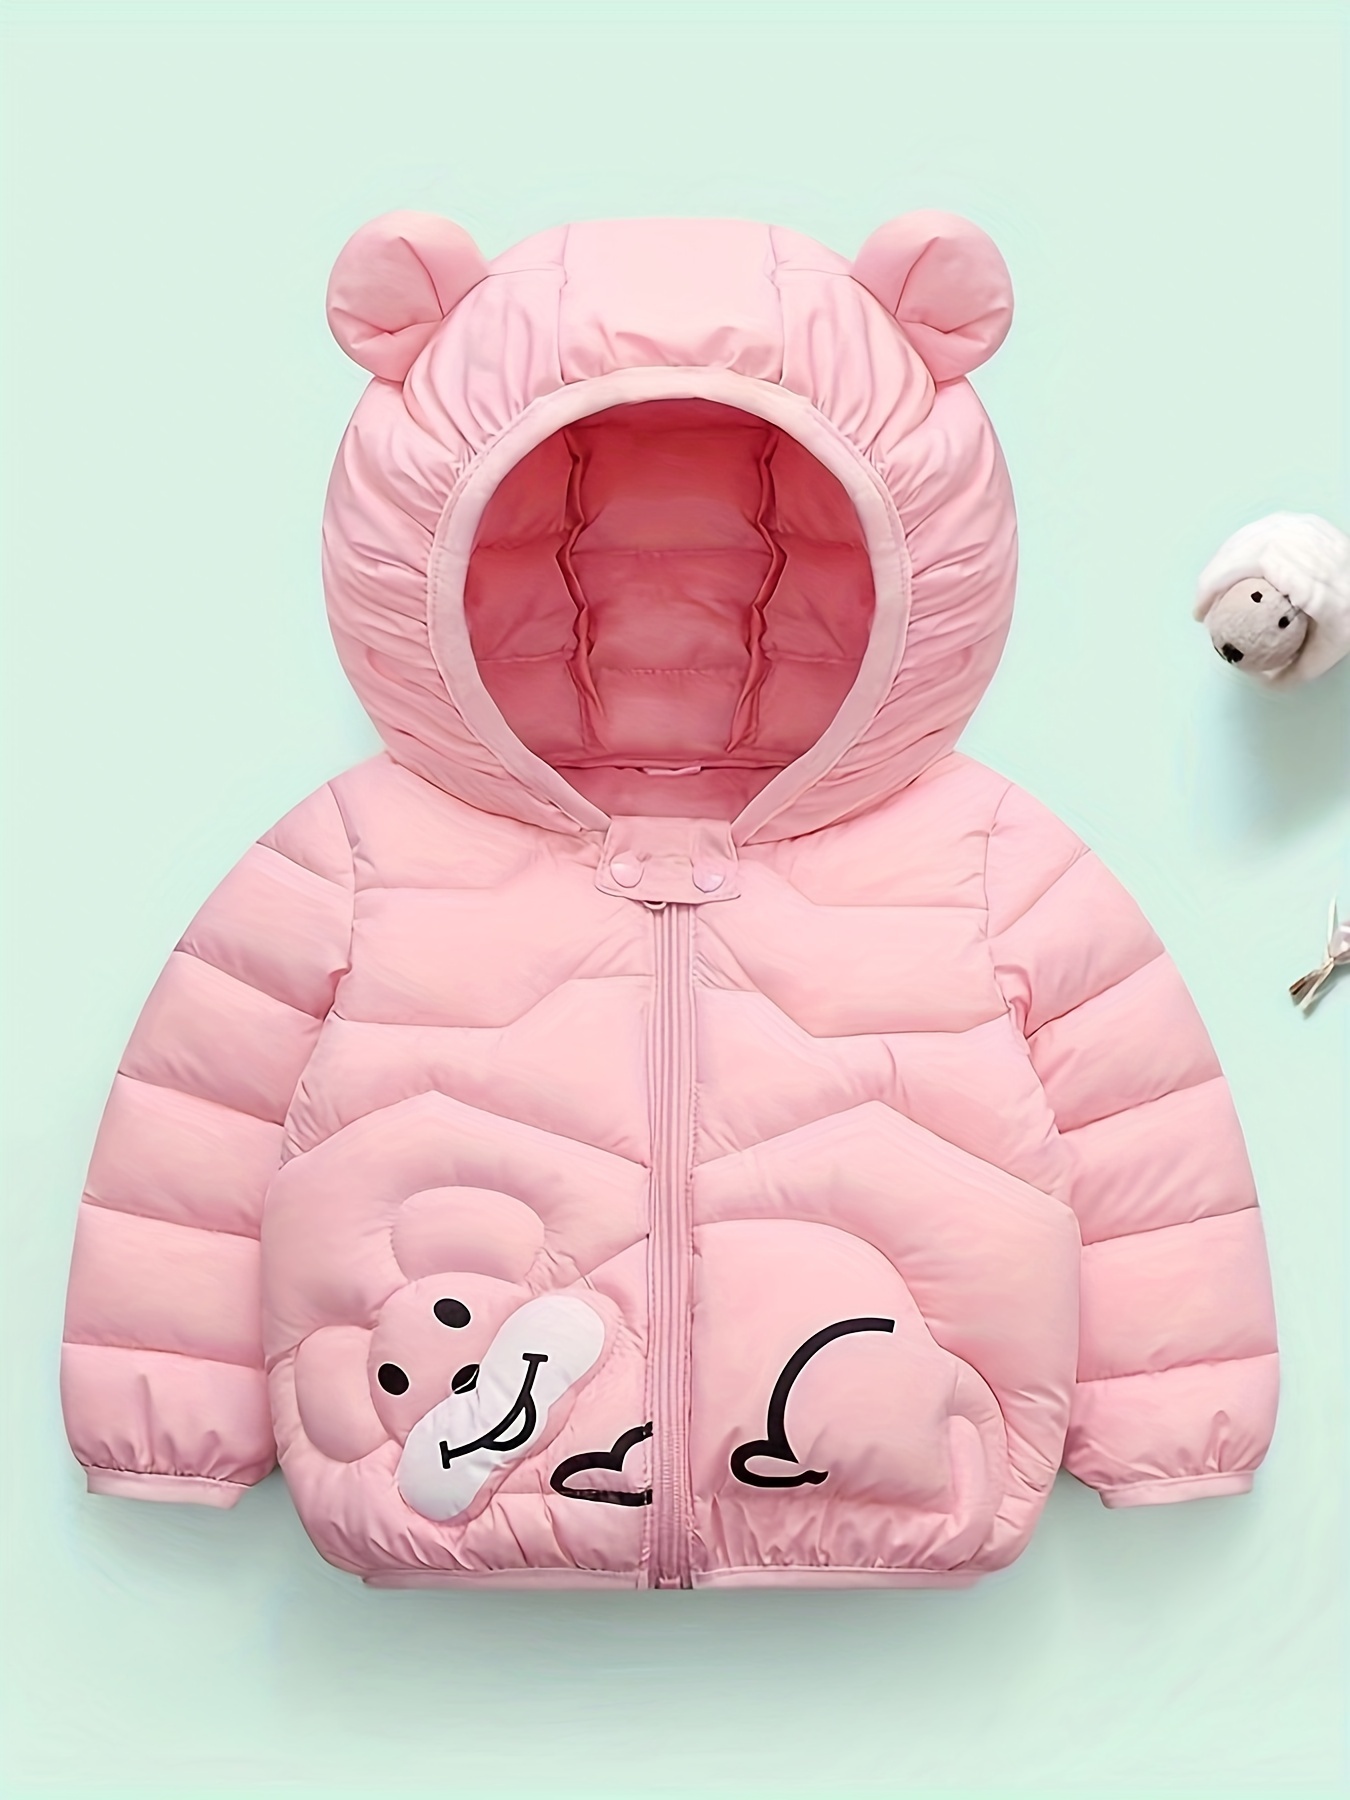 Kid's Cute Mouse Ears Hooded Cotton-padded Jacket, Warm Zip Up